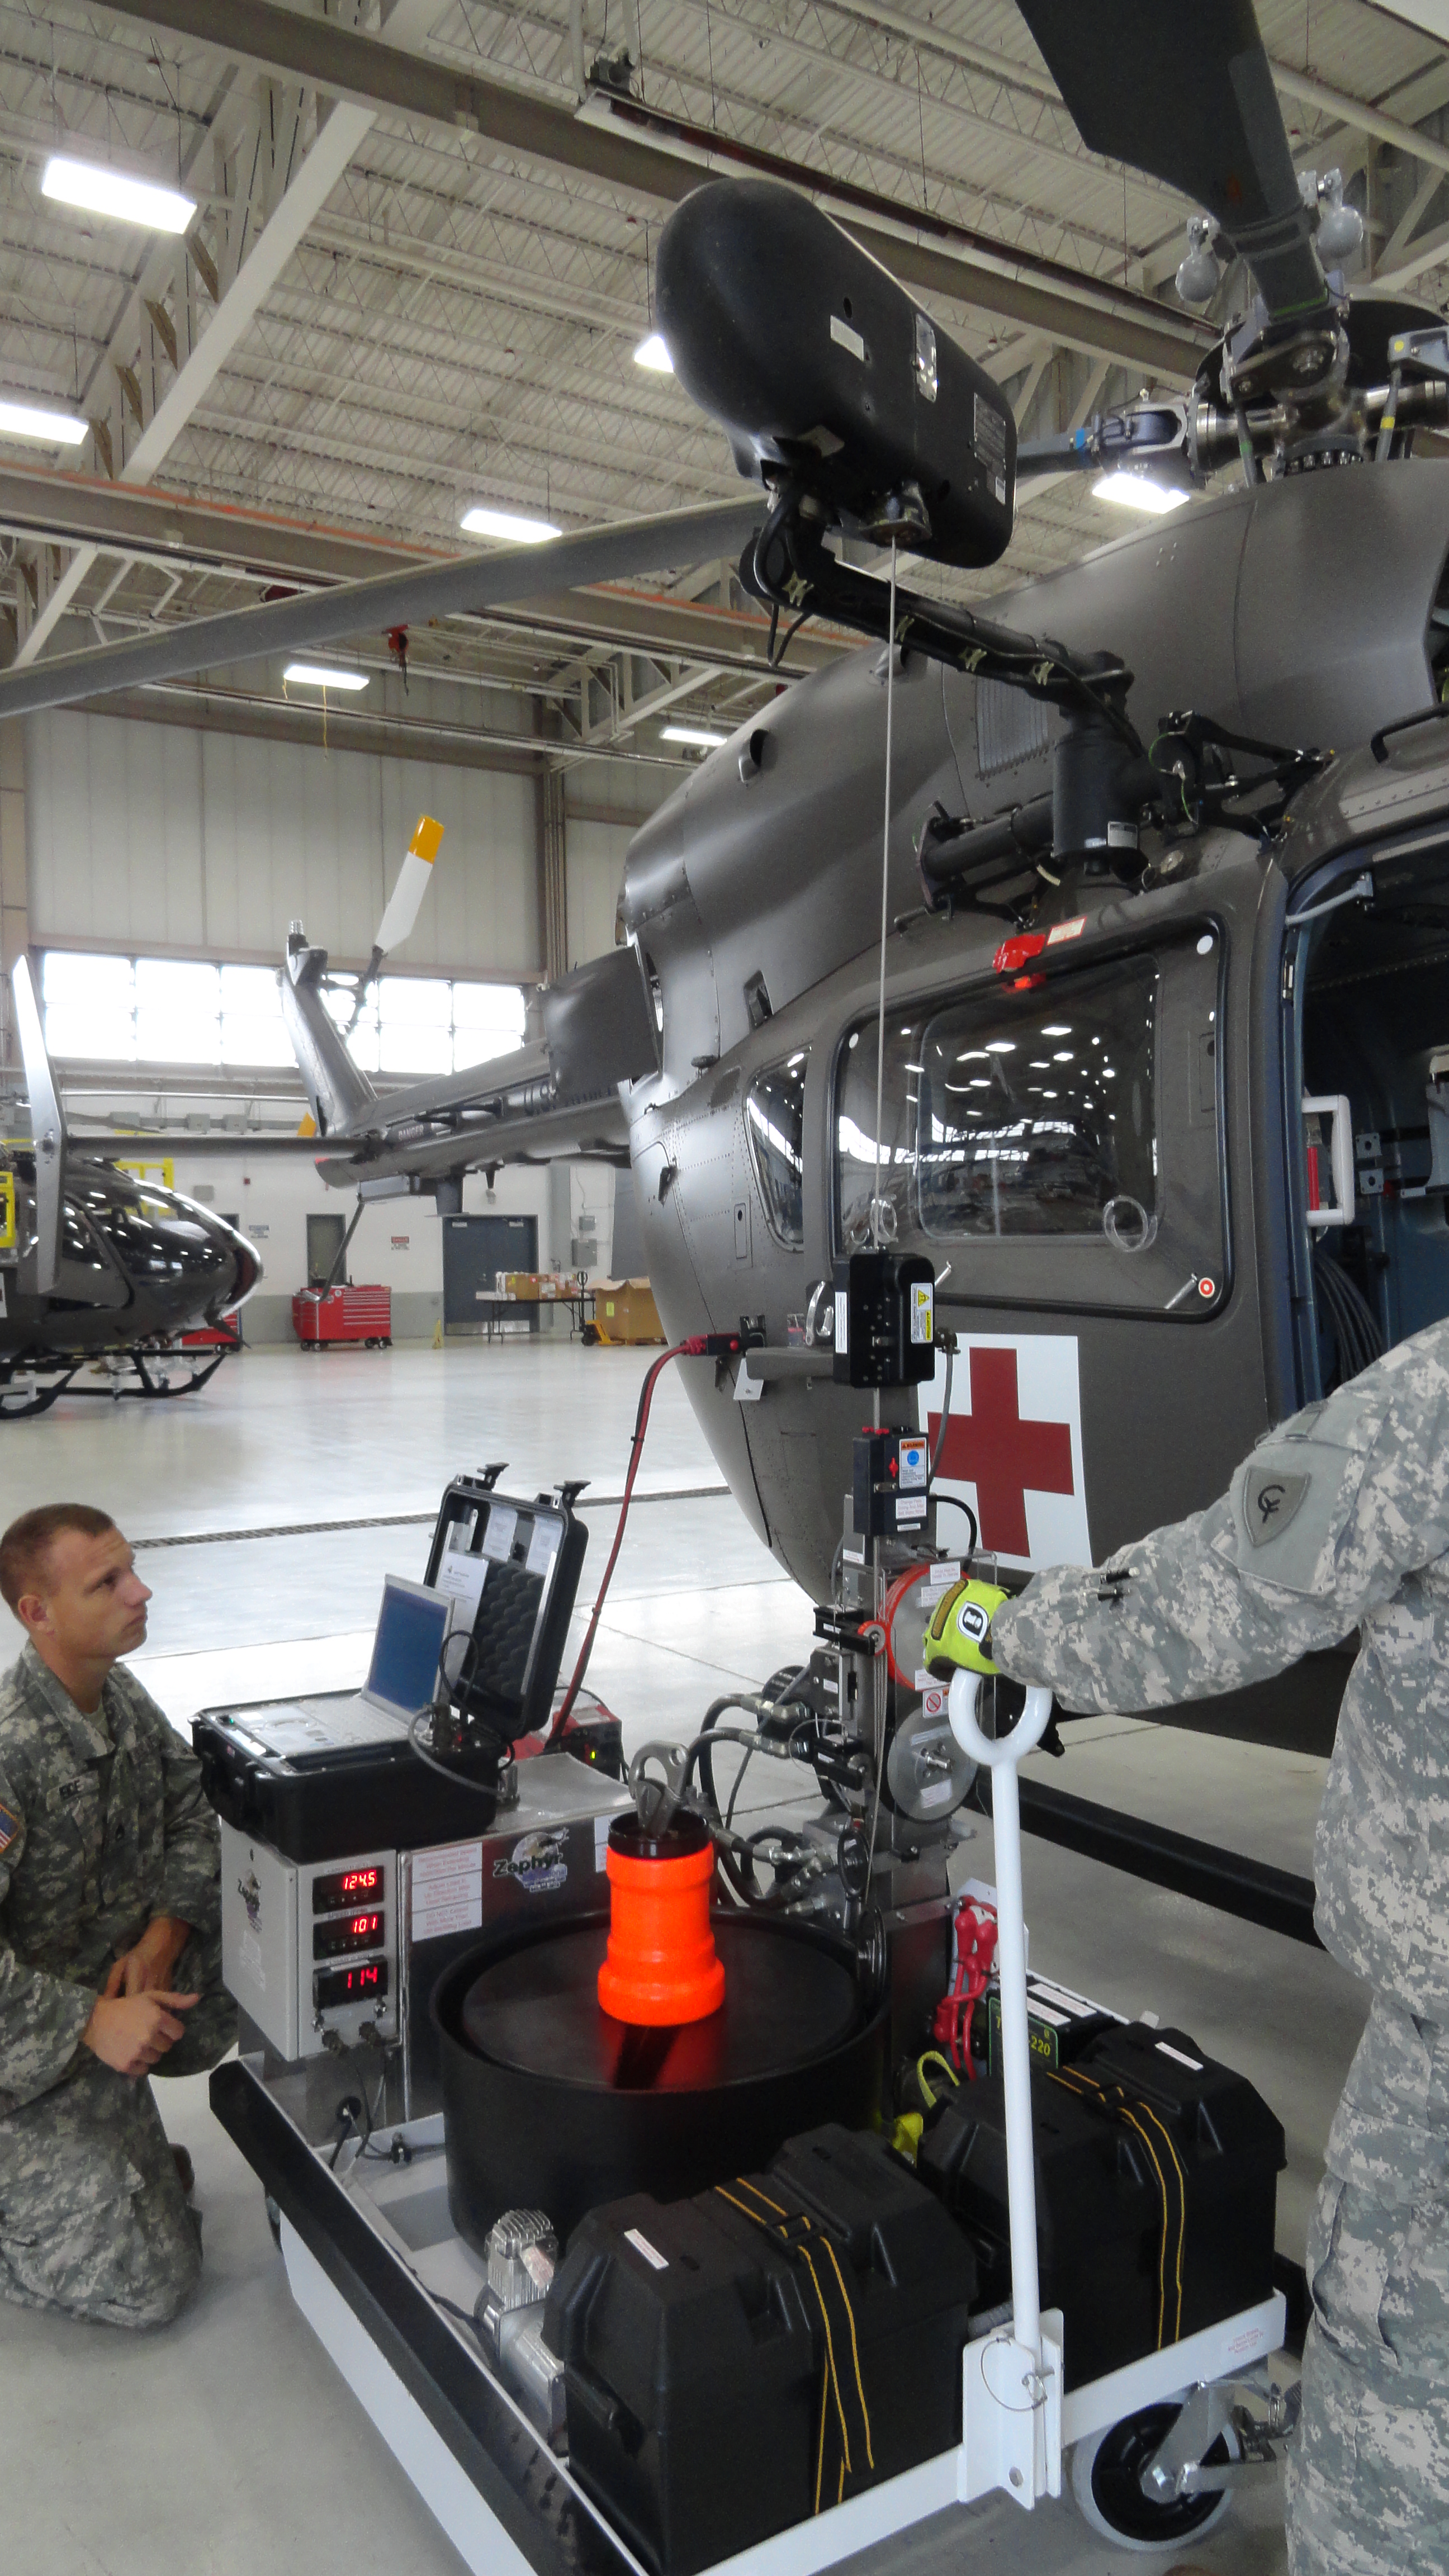 Soldiers working on Lakota helicopter with Zephyr.